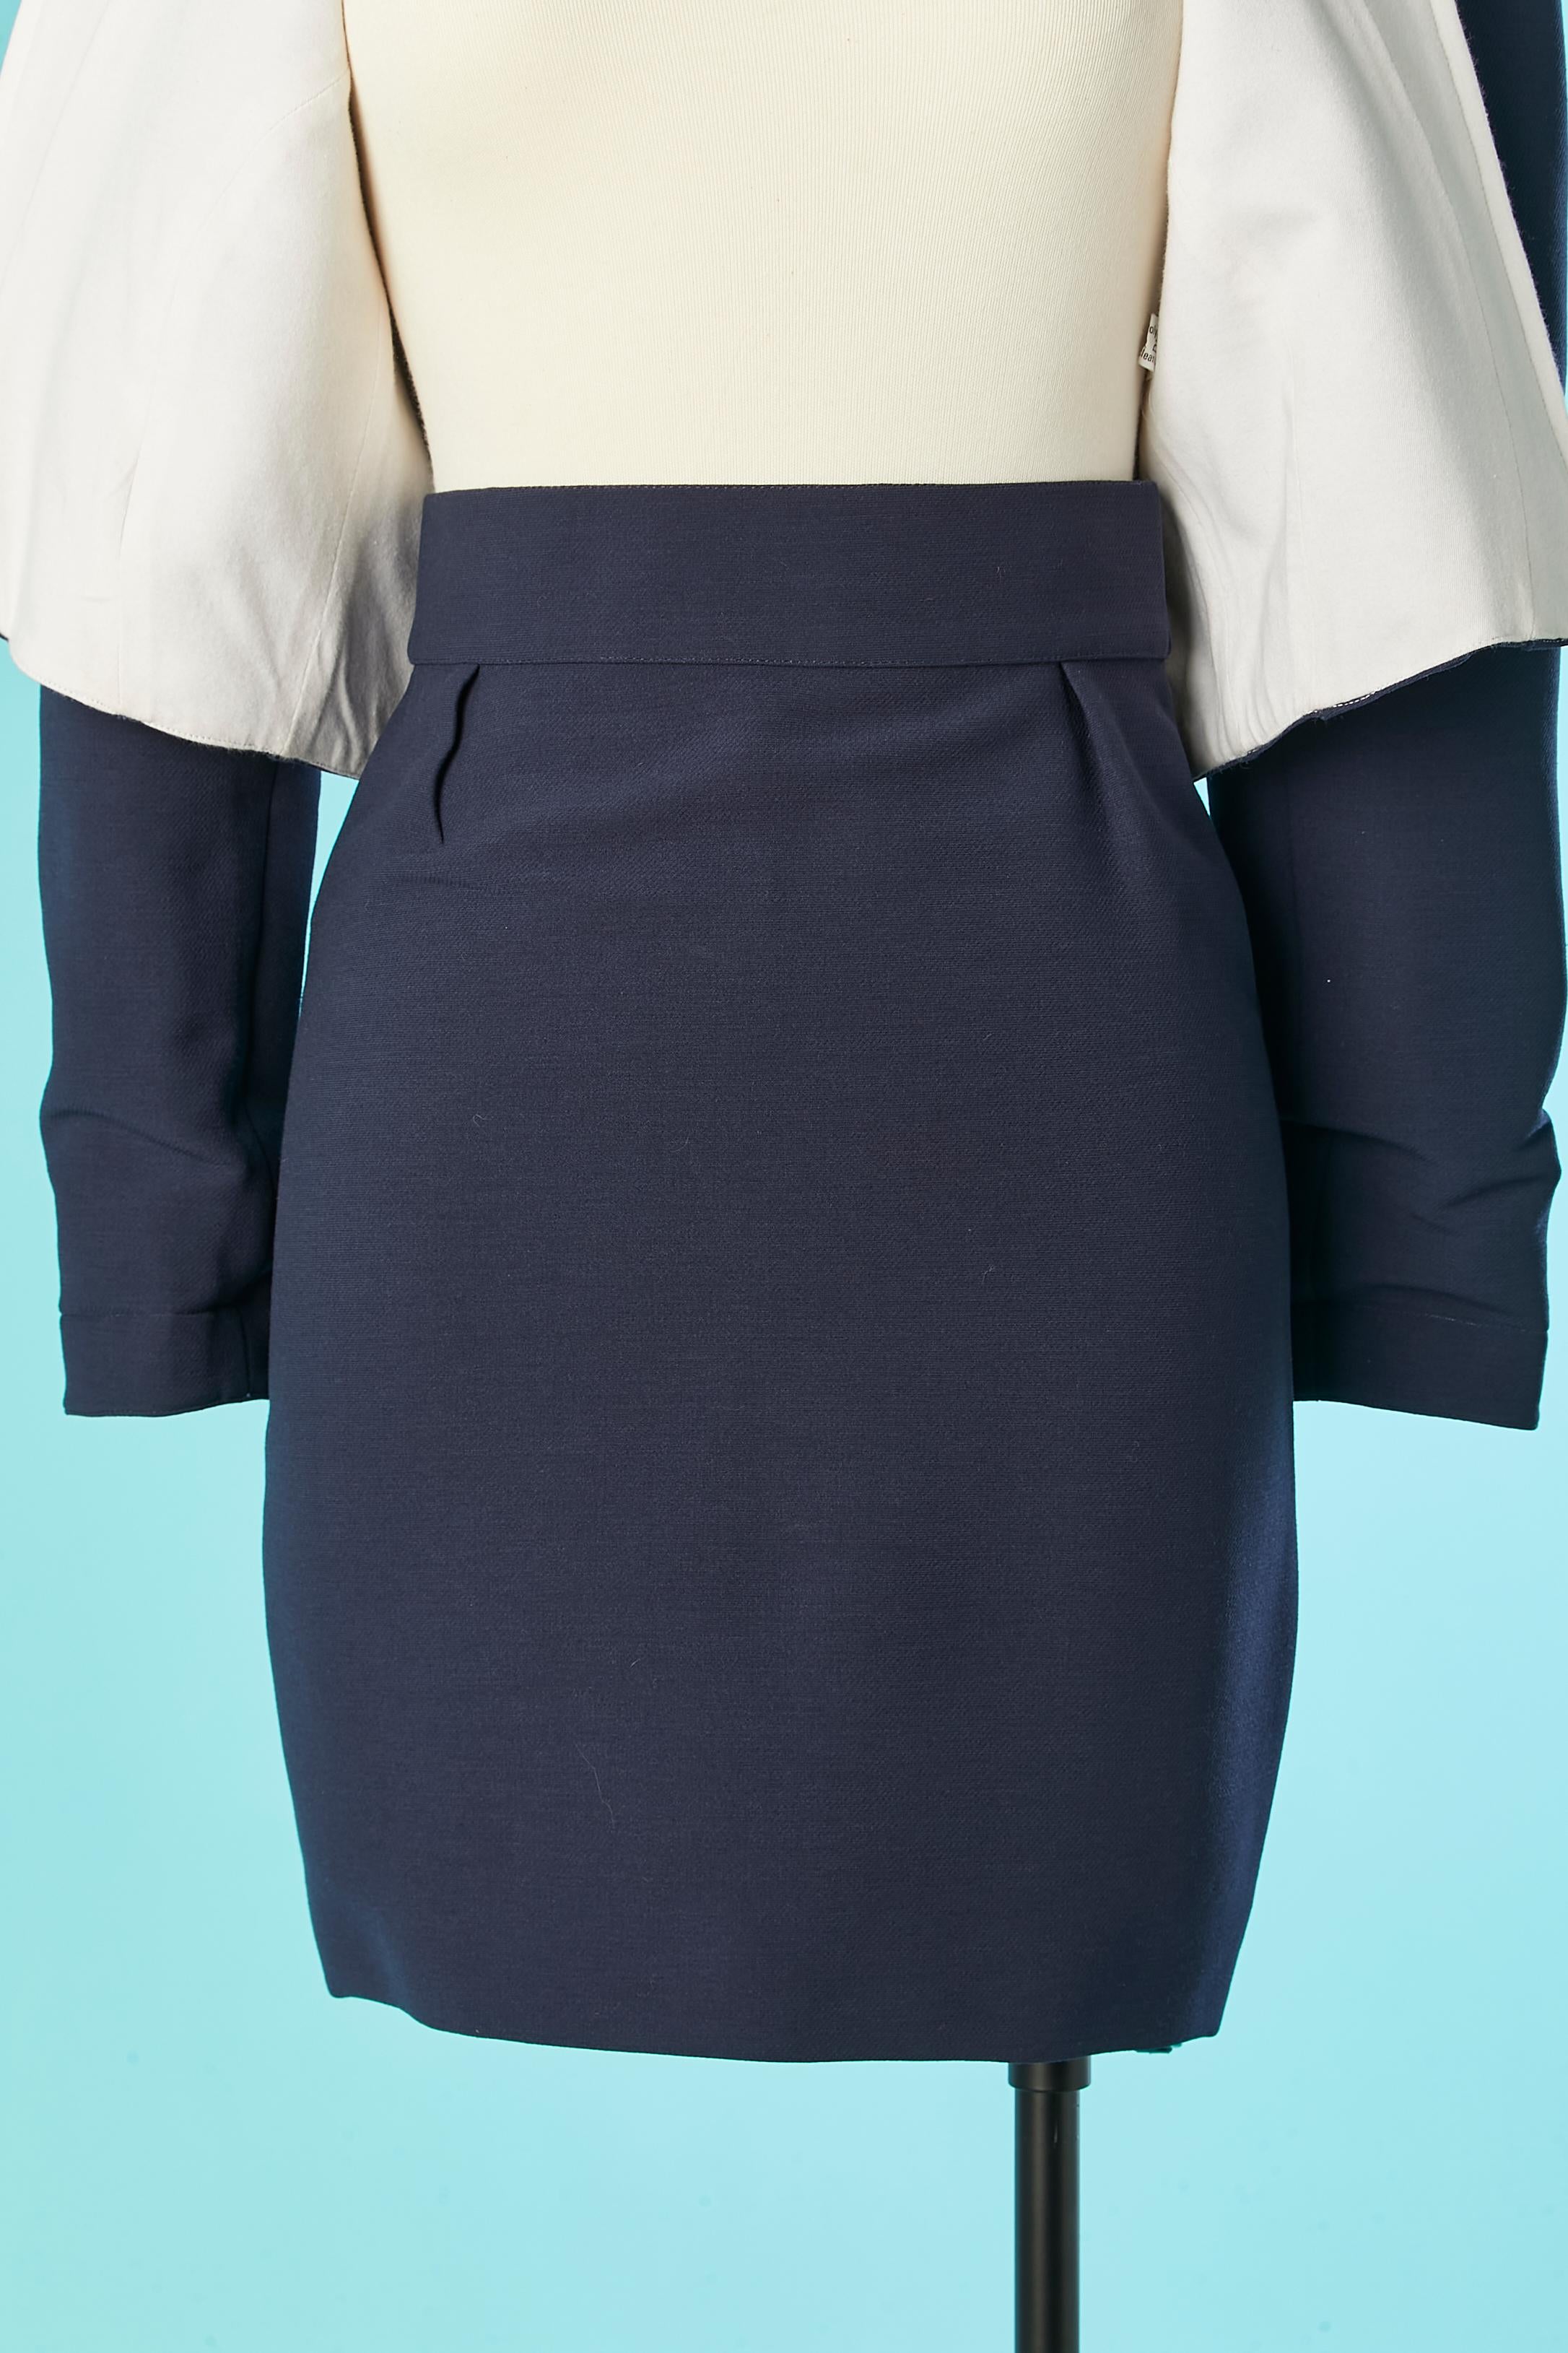 Navy blue skirt-suit  Thierry Mugler  For Sale 1